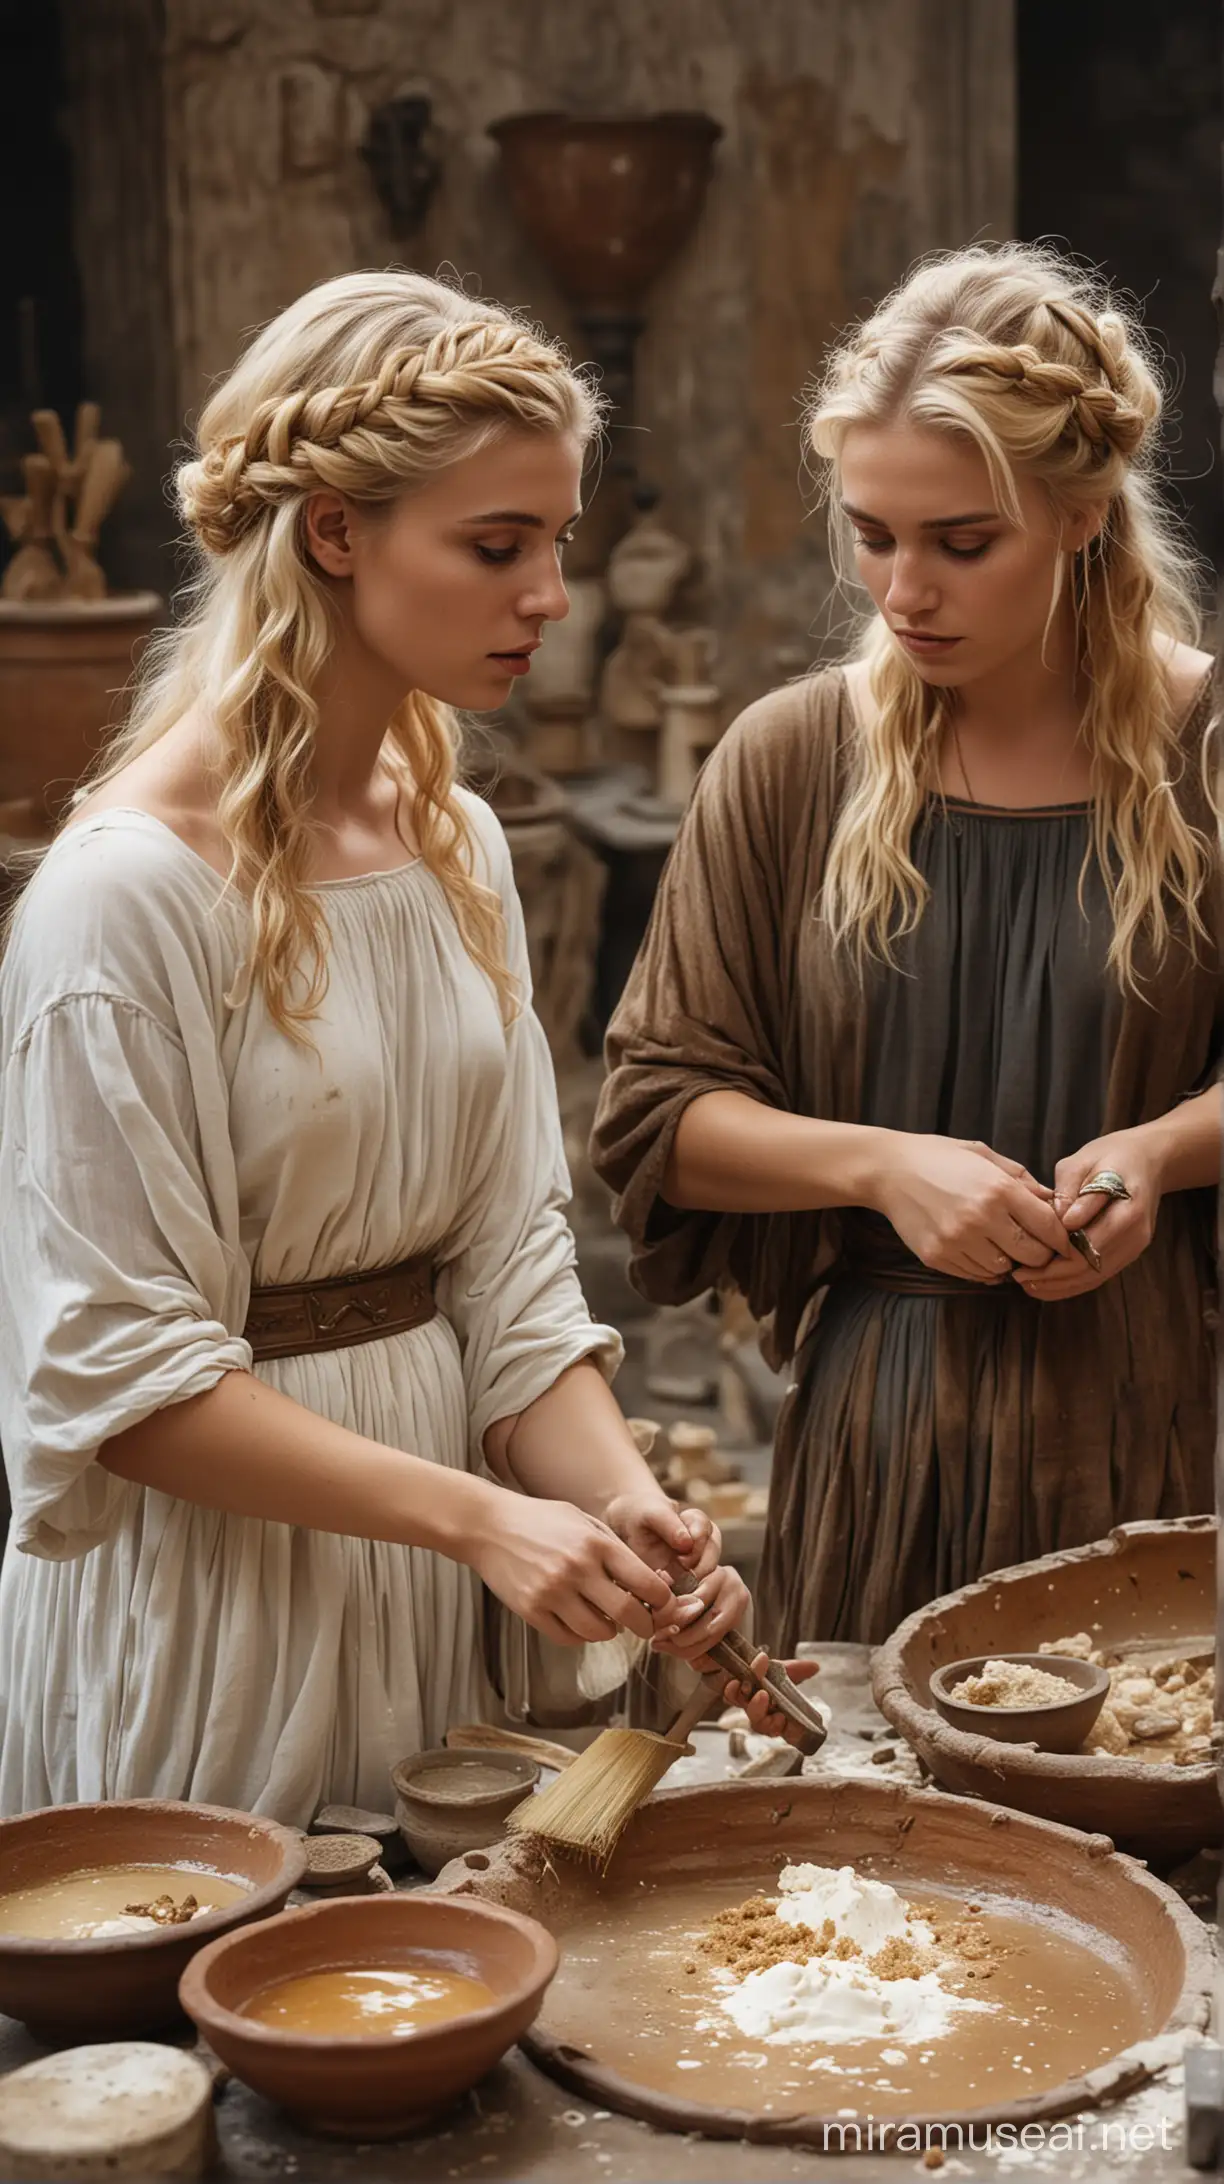 Two (((blonde haired women))) in ancient Rome, engaged in the meticulous process of mixing and applying ((bleaching agents)) and dyes, surrounded by vessels and tools indicative of the era in a moody place